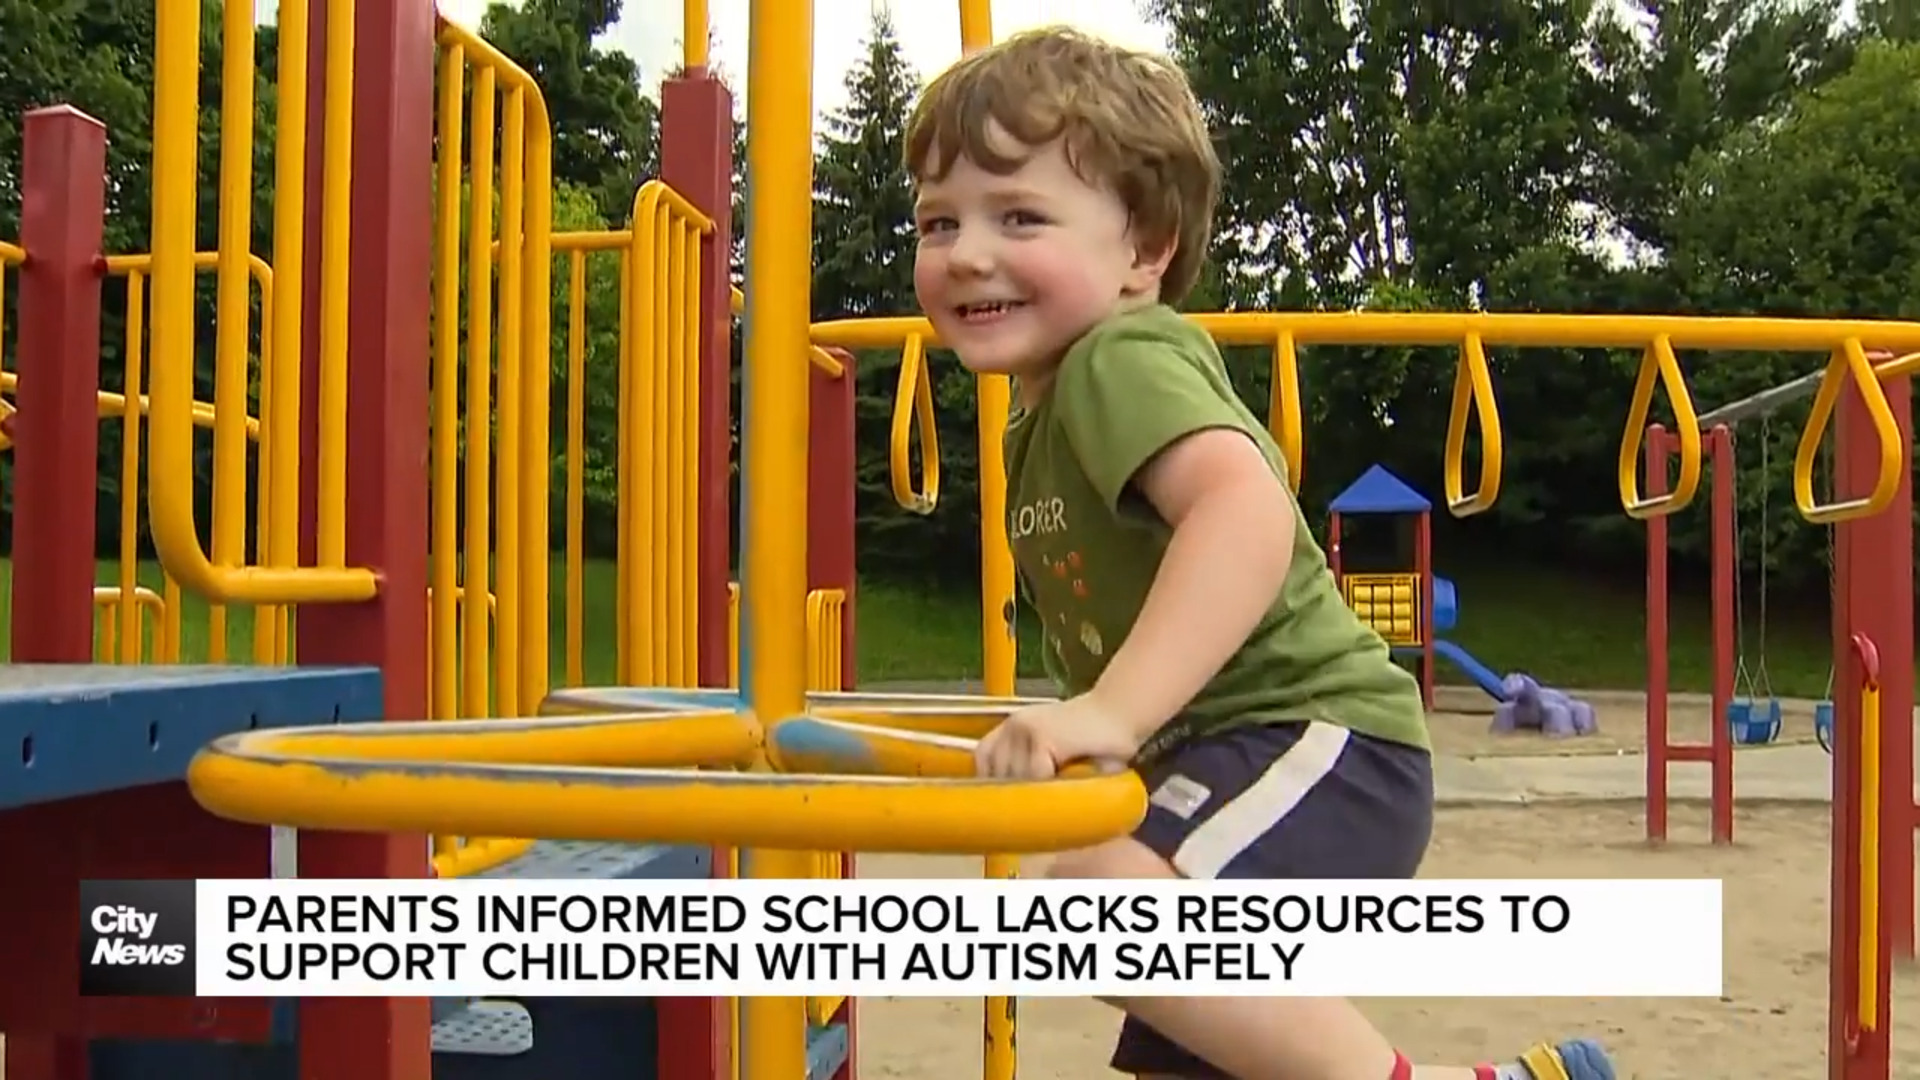 Parents informed school lacks resources to support children with autism safely